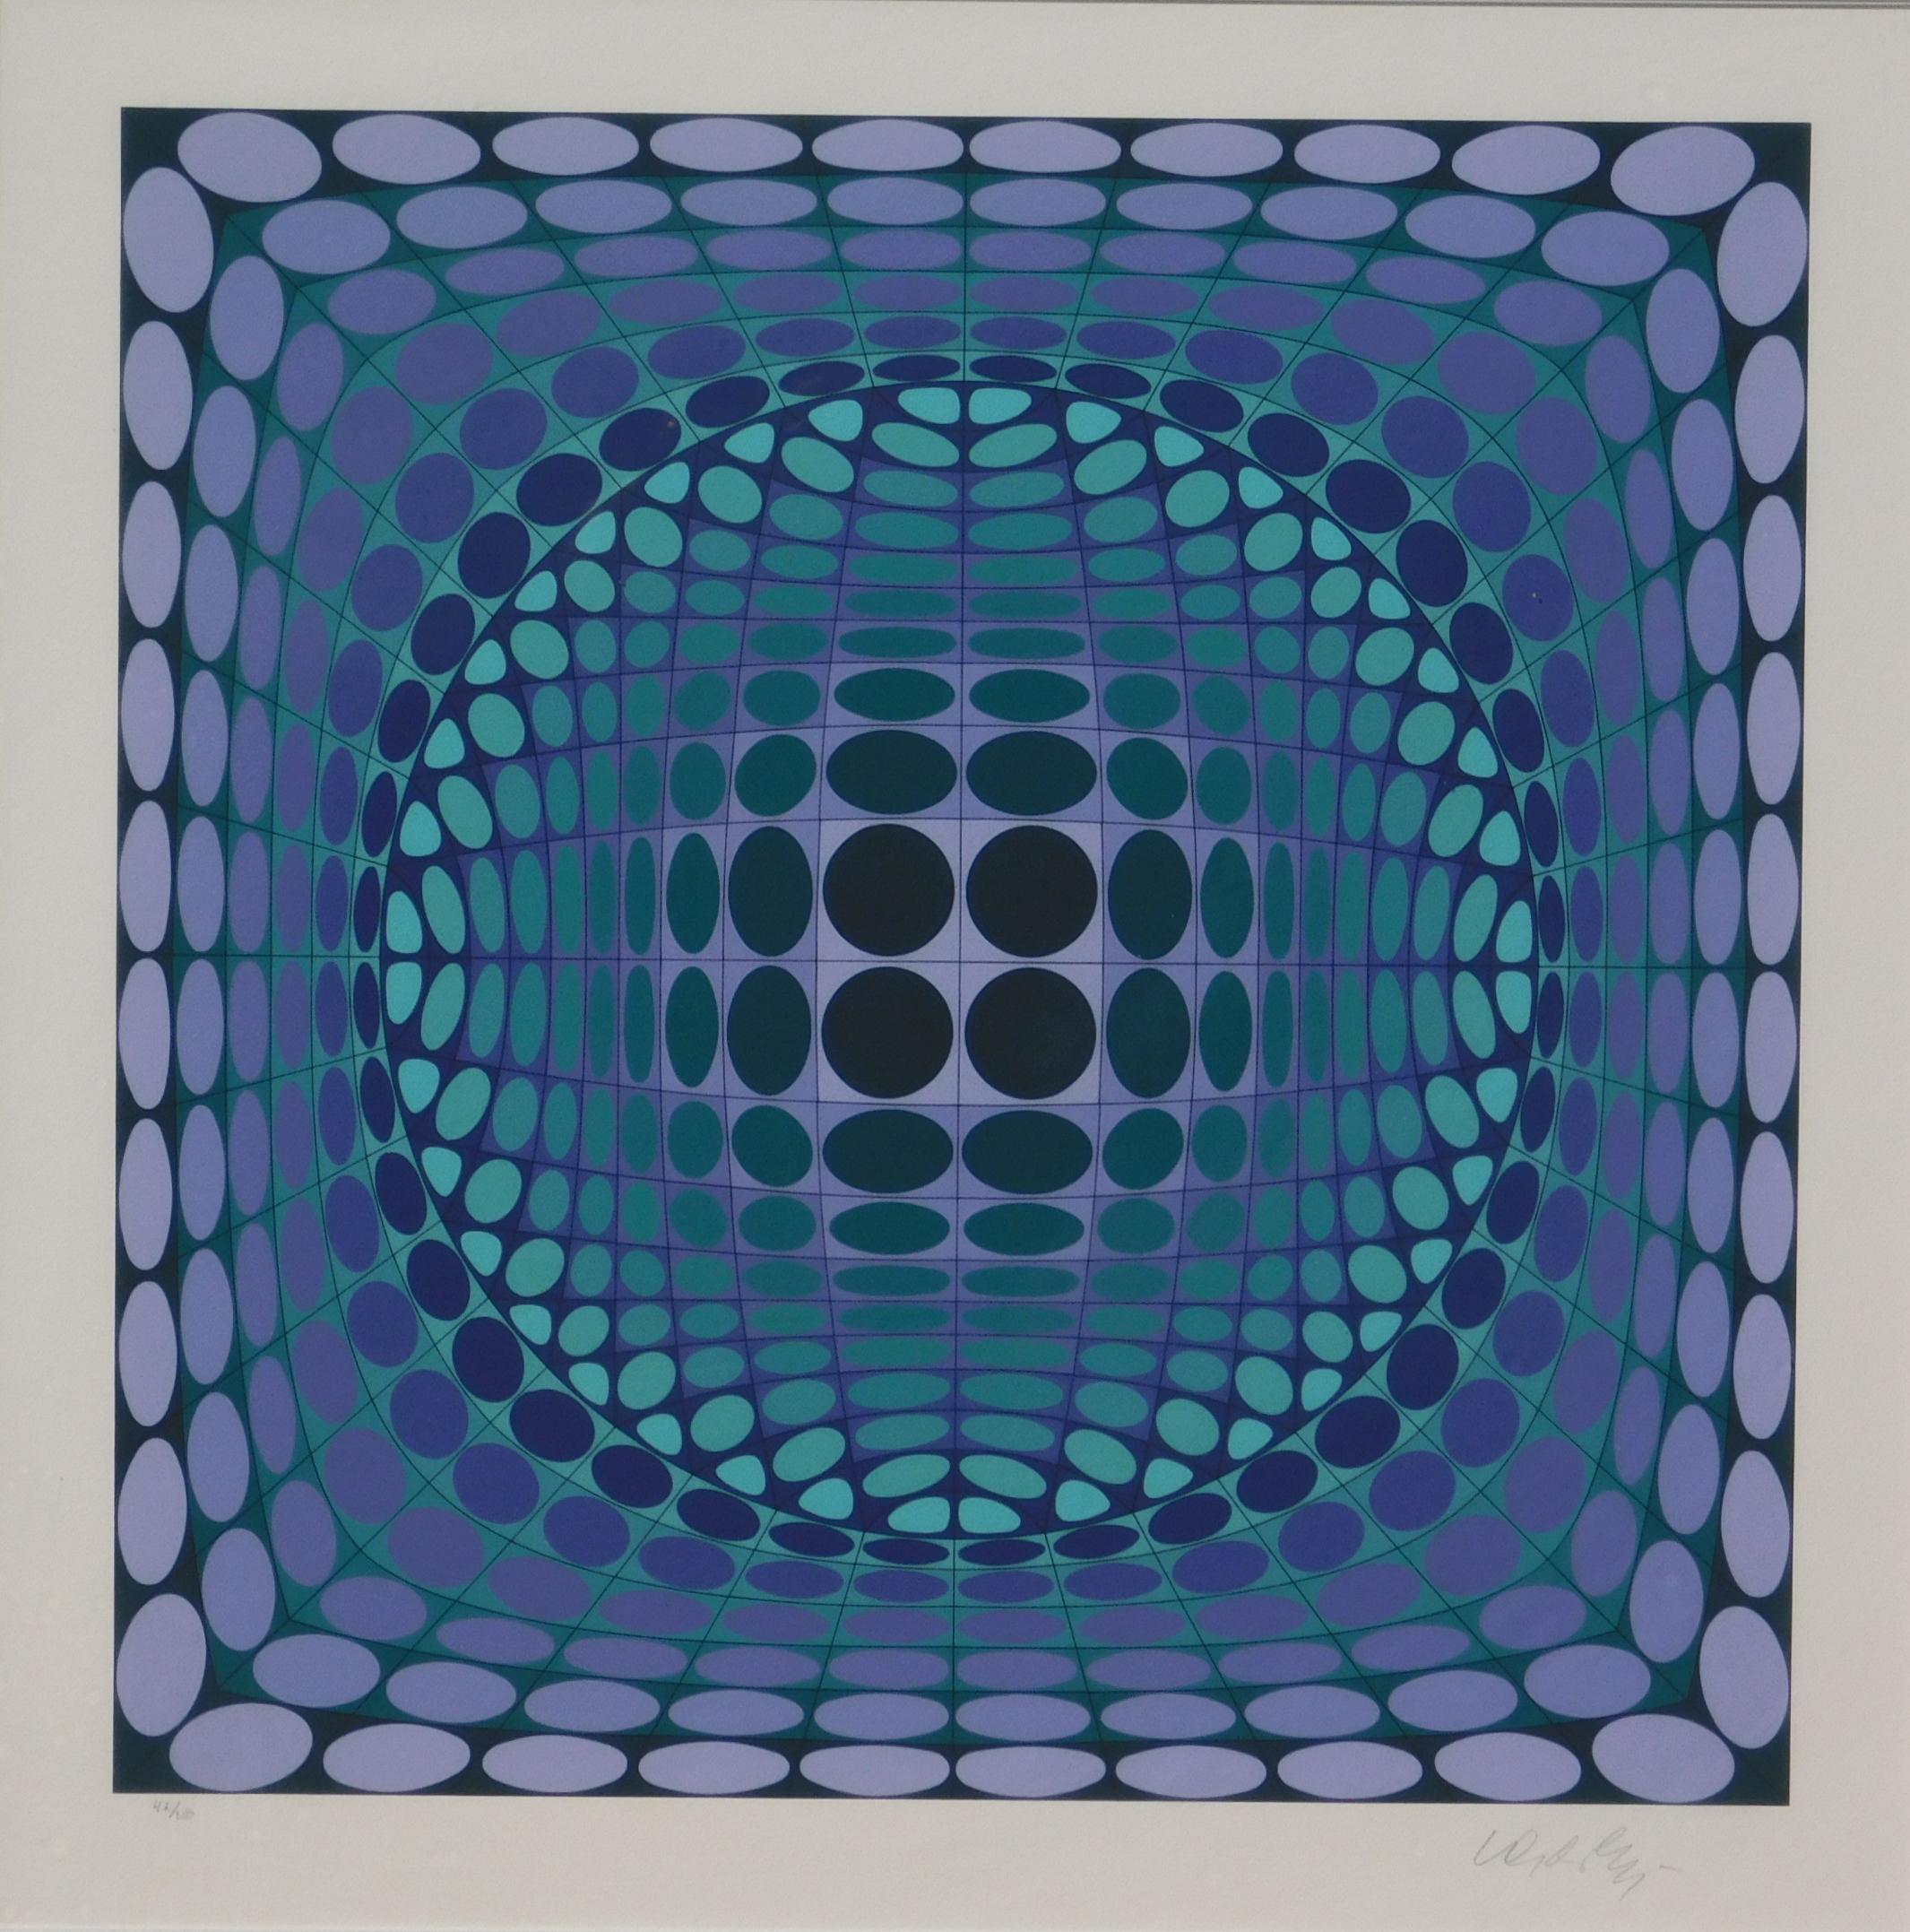 Striking Geometric design by Victor Vasarely (1906-1997) titled “Uran.”
Original Screenprint in color hand signed by the artist lower right. 
Edition size is seen in pencil lower left: 42/250. Archivally framed and in excellent condition.
Image